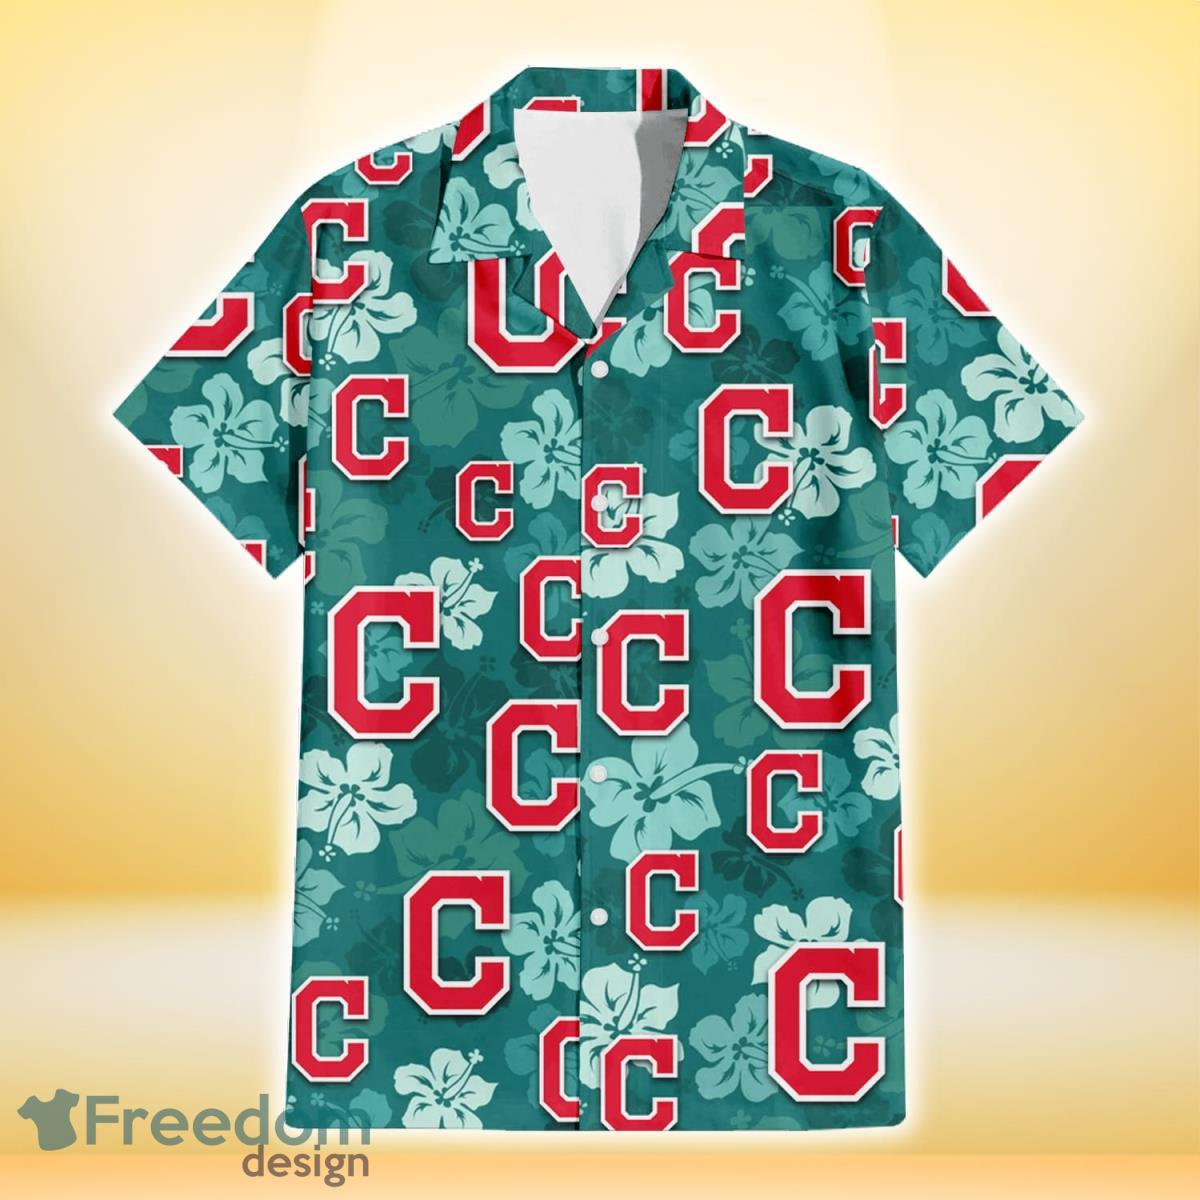 Cleveland Indians White Tropical Leaf Red Hibiscus Navy Background 3D  Hawaiian Shirt Gift For Fans - Freedomdesign